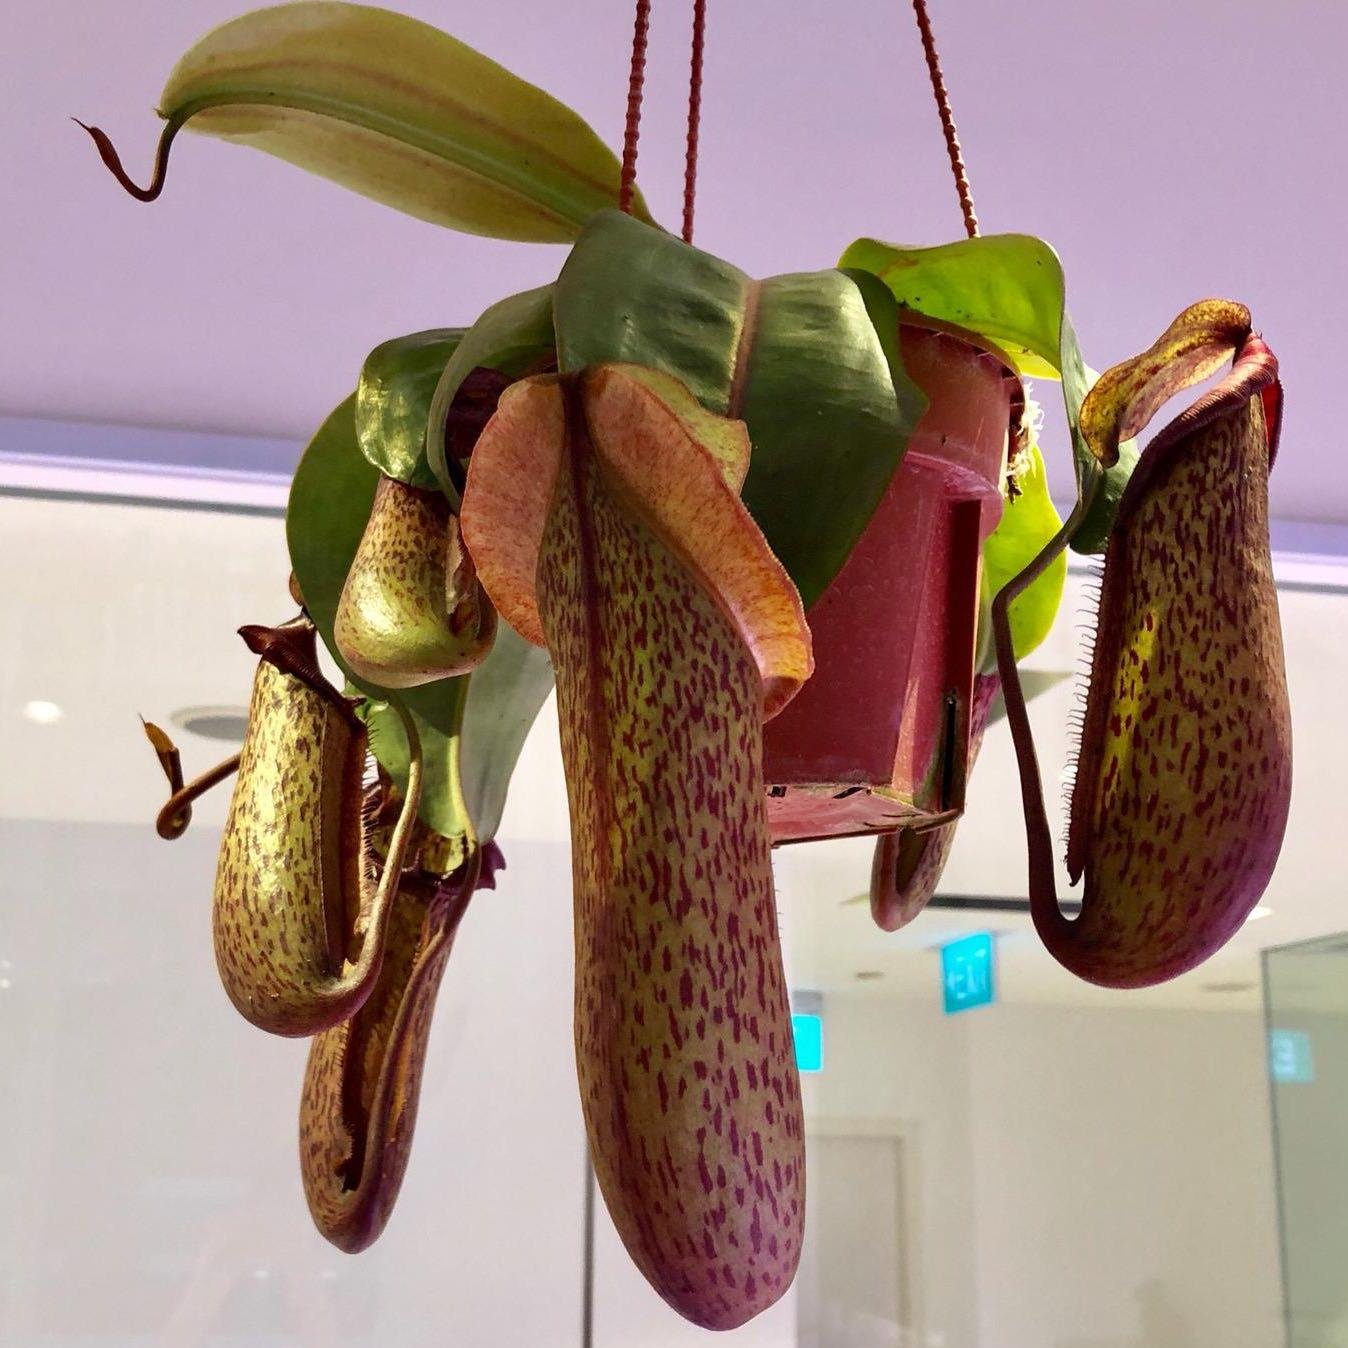 Nepenthes - Monkey Cup Plants